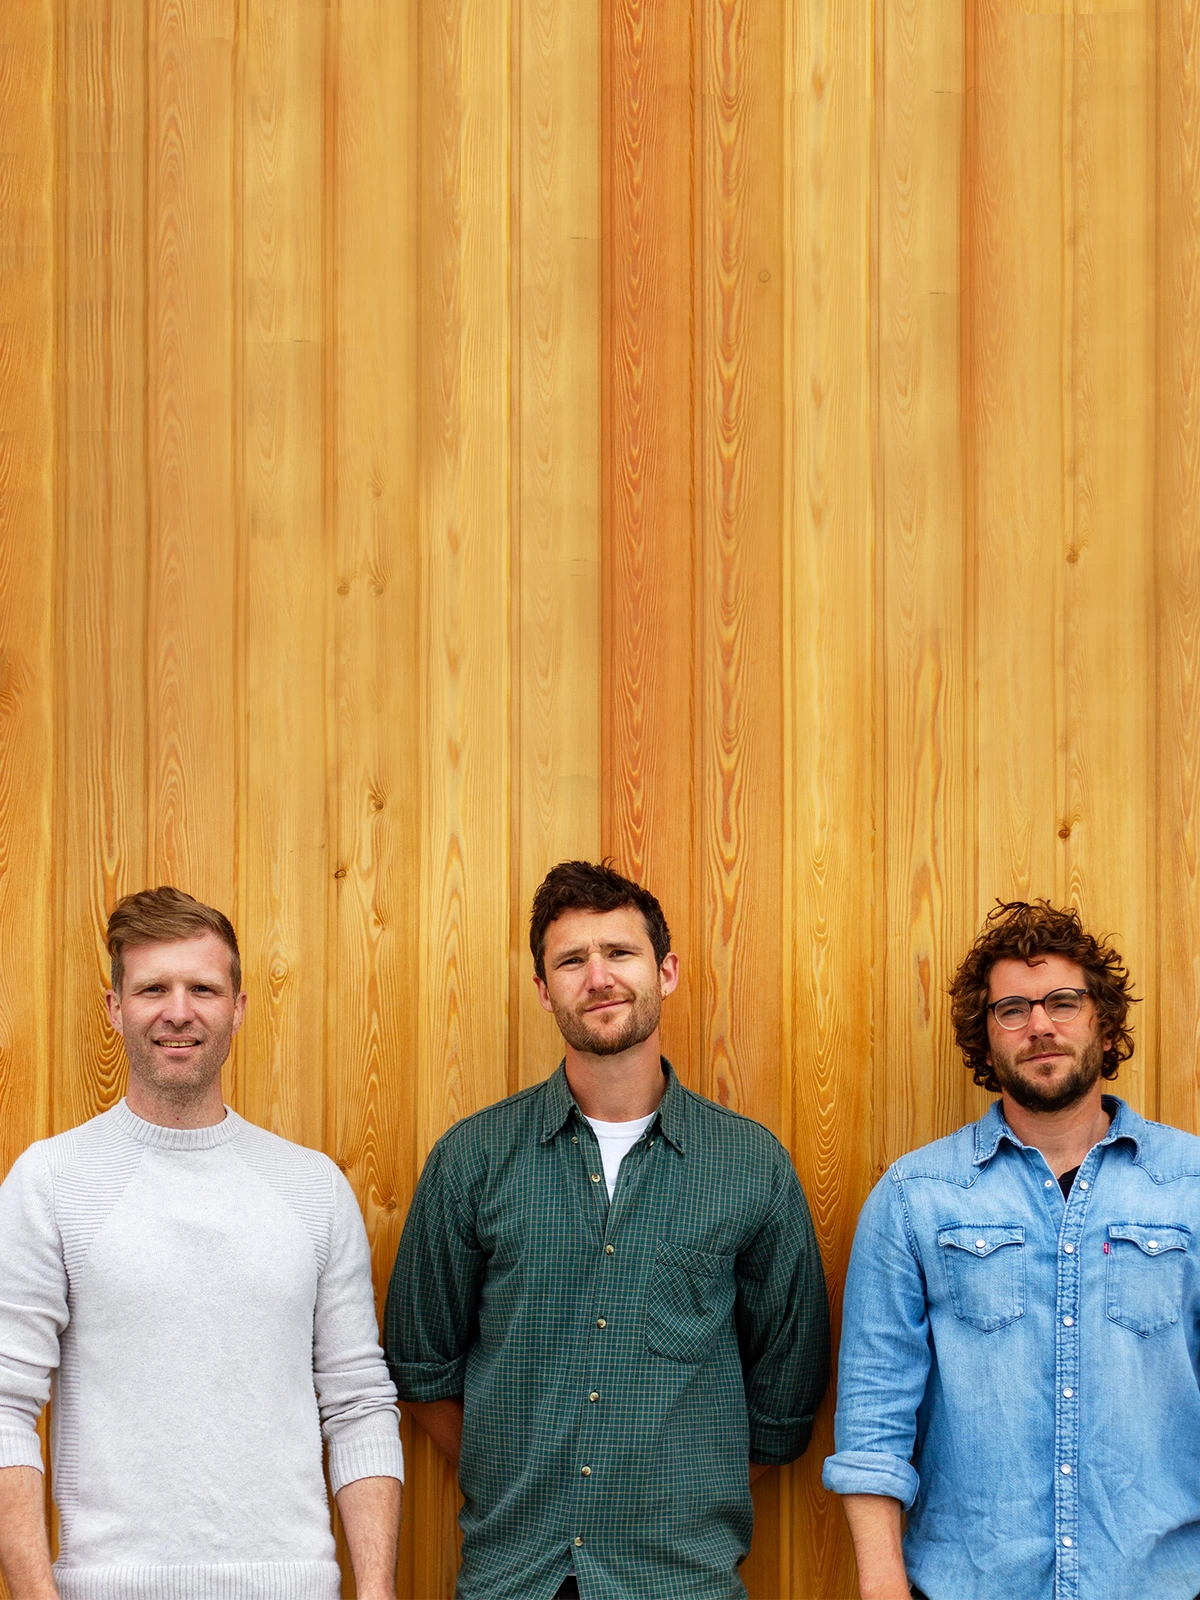 coast creative founders dave jones, nick williams and luke white stood against a plain wooden wall